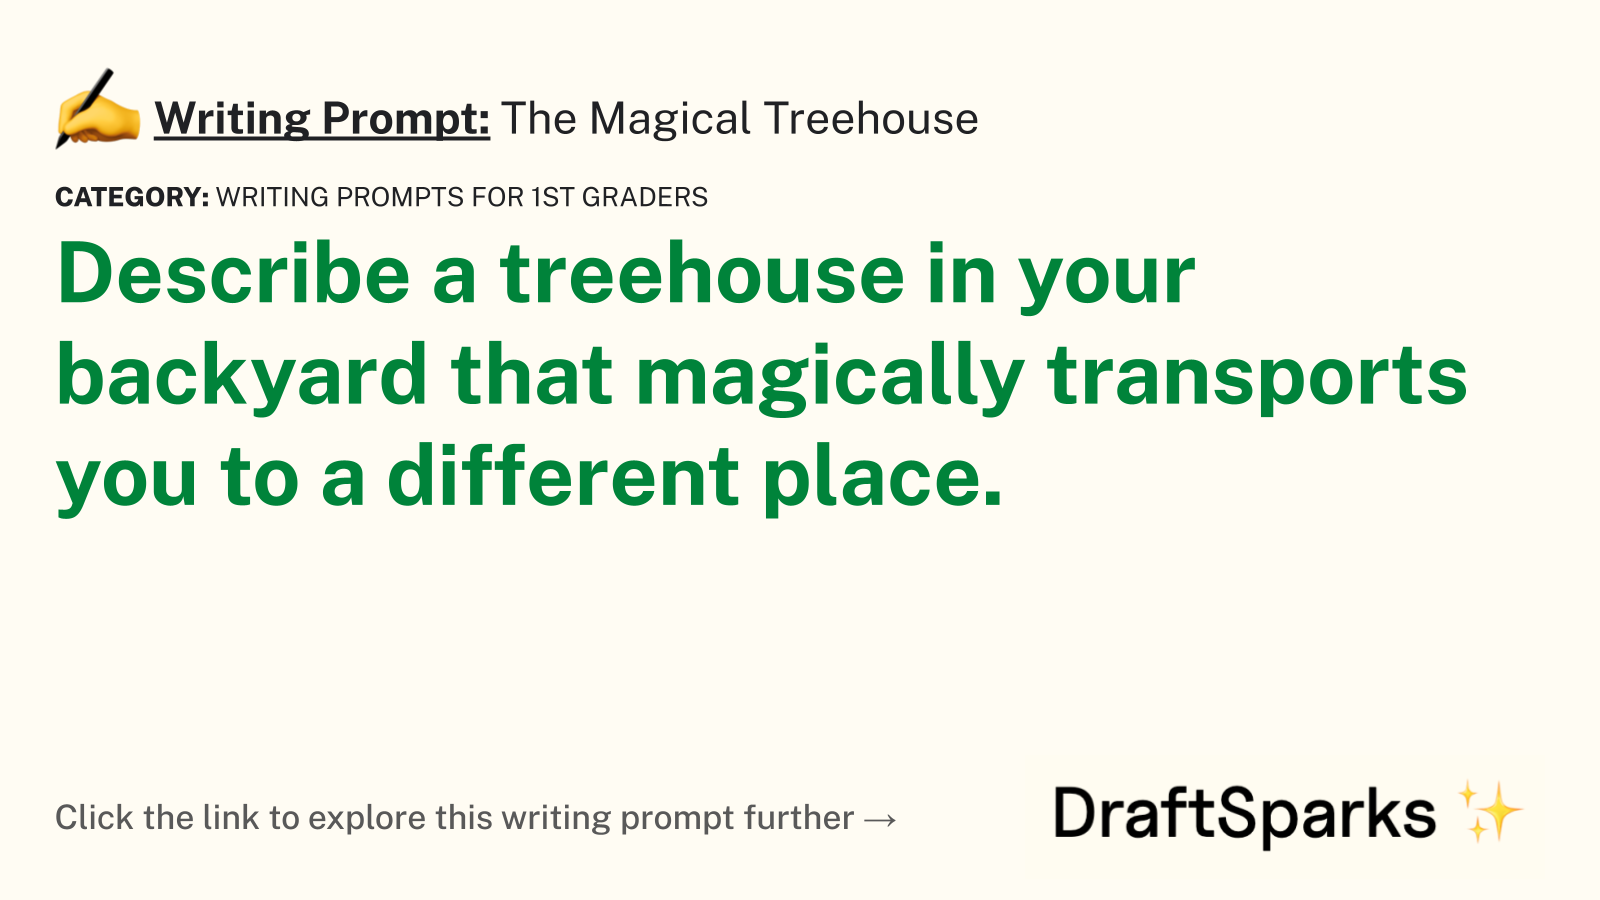 The Magical Treehouse